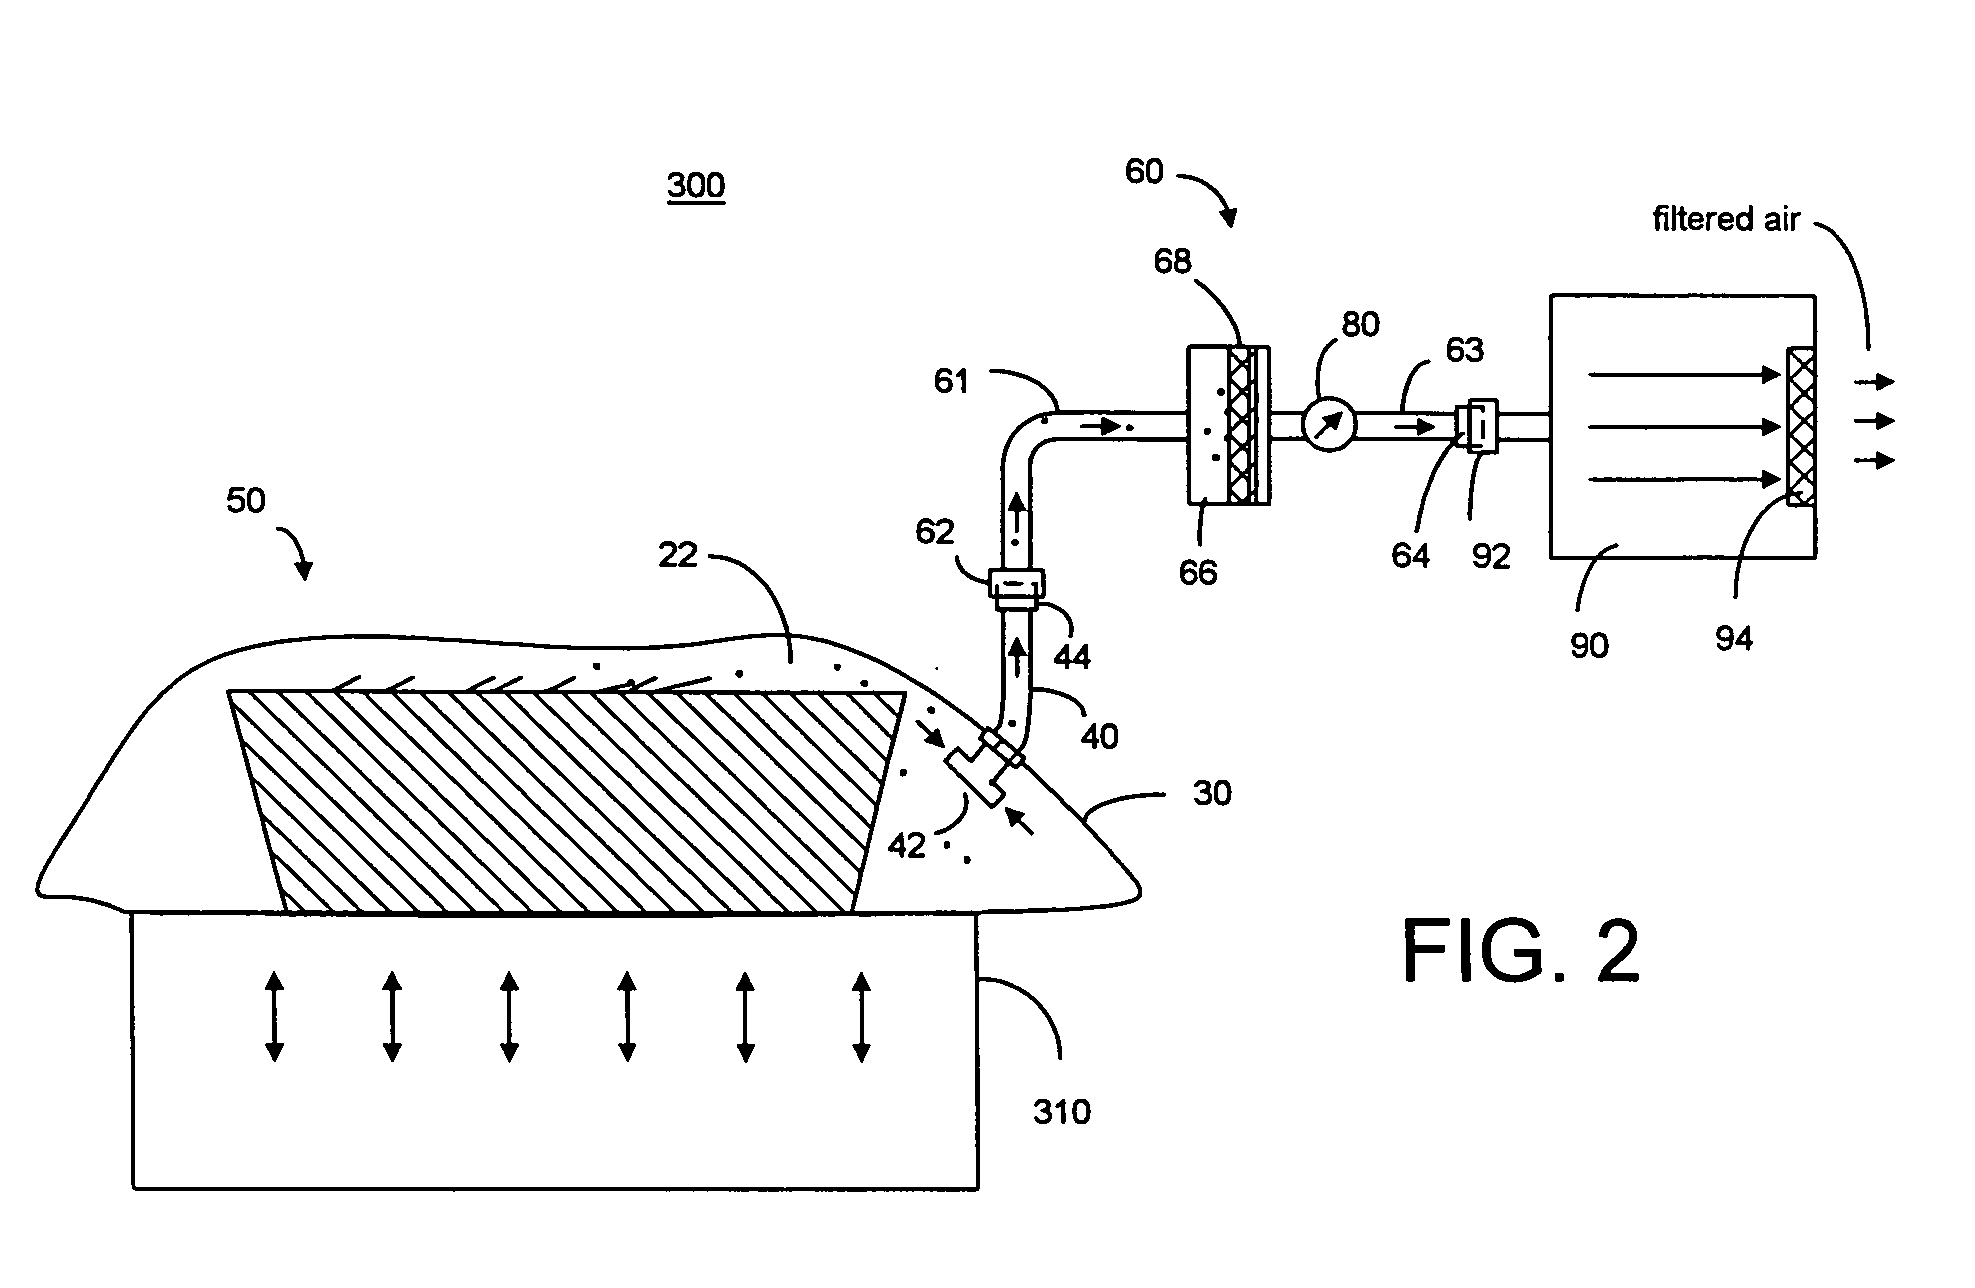 Method and device for isolating, collecting and transferring hazardous samples